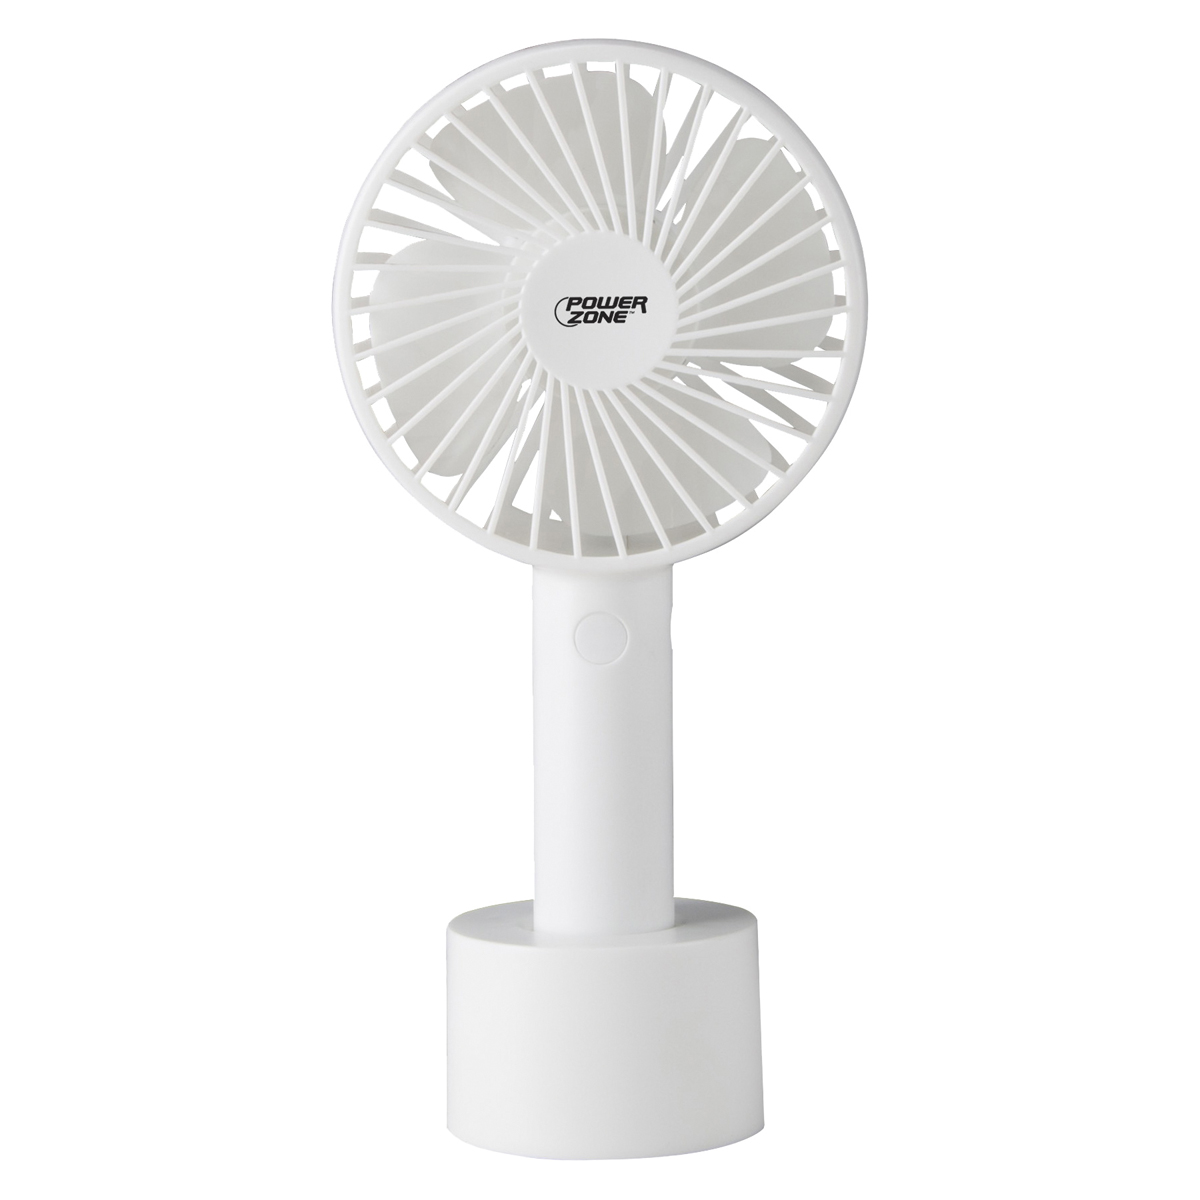 802W Rechargeable Handheld Fan, 5 VAC, 4 in Dia Blade, 4-Blade, 3-Speed, White